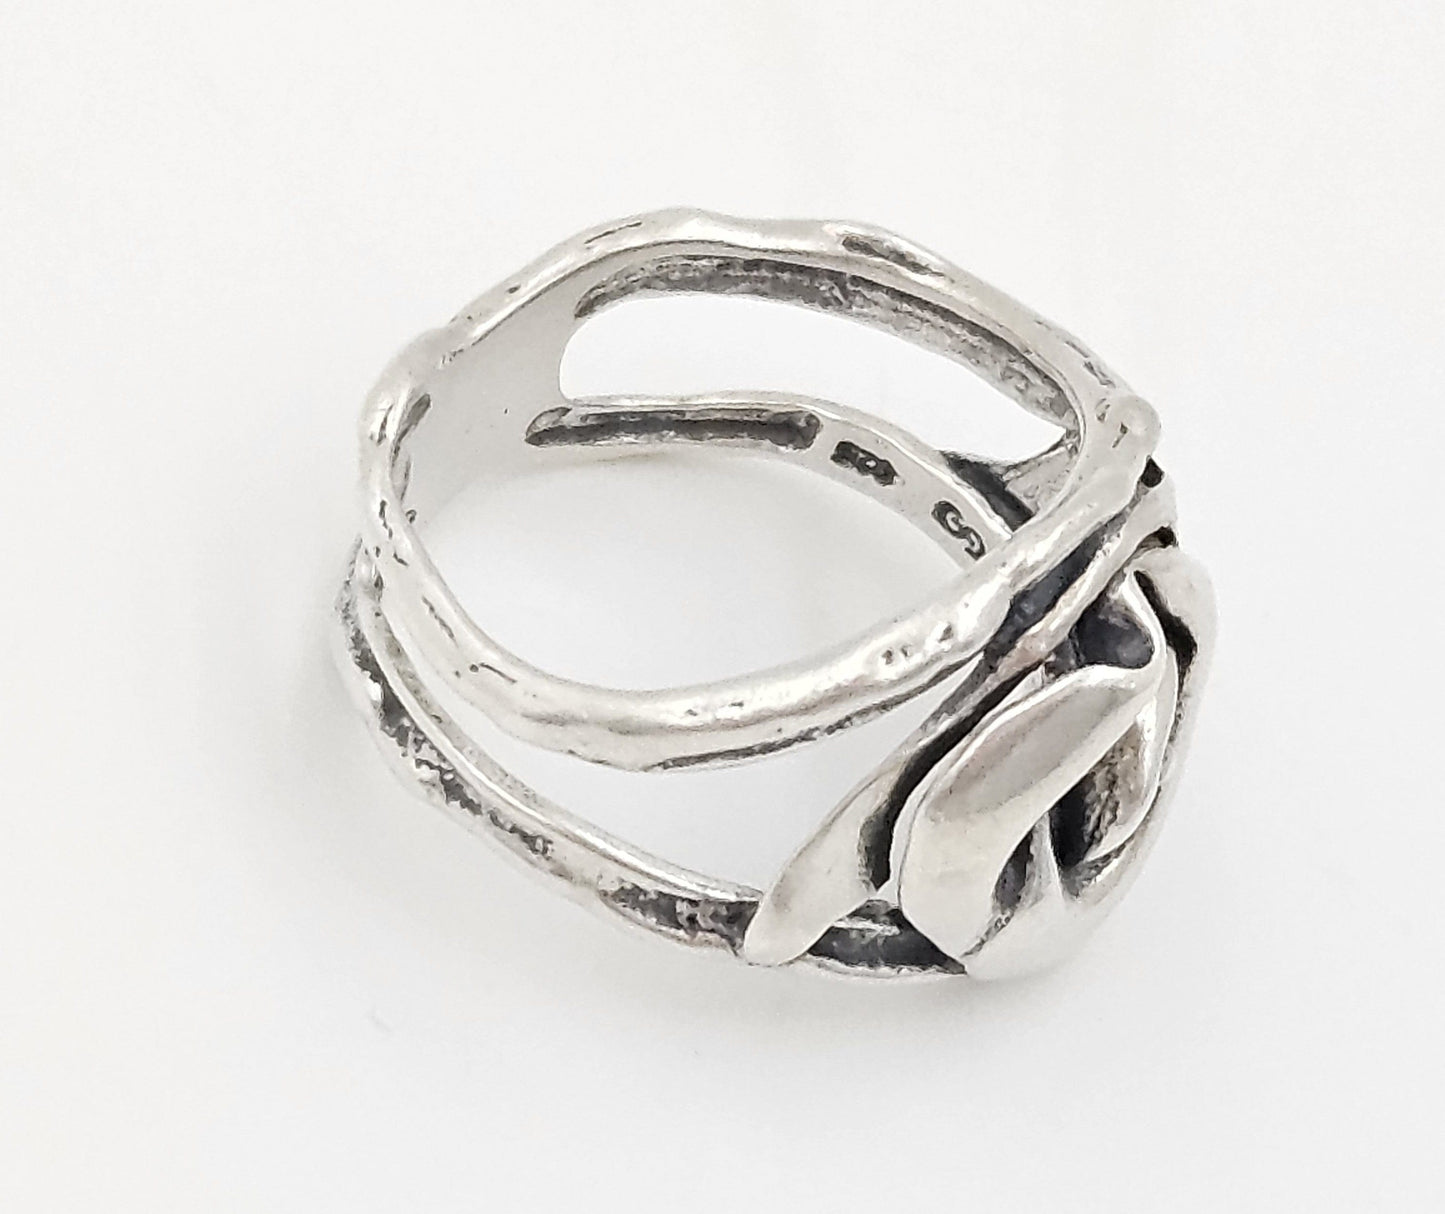 Golan Goldex Jewelry Golan Goldex Bold Abstract Modernist Brutalist Sterling Cocktail Ring